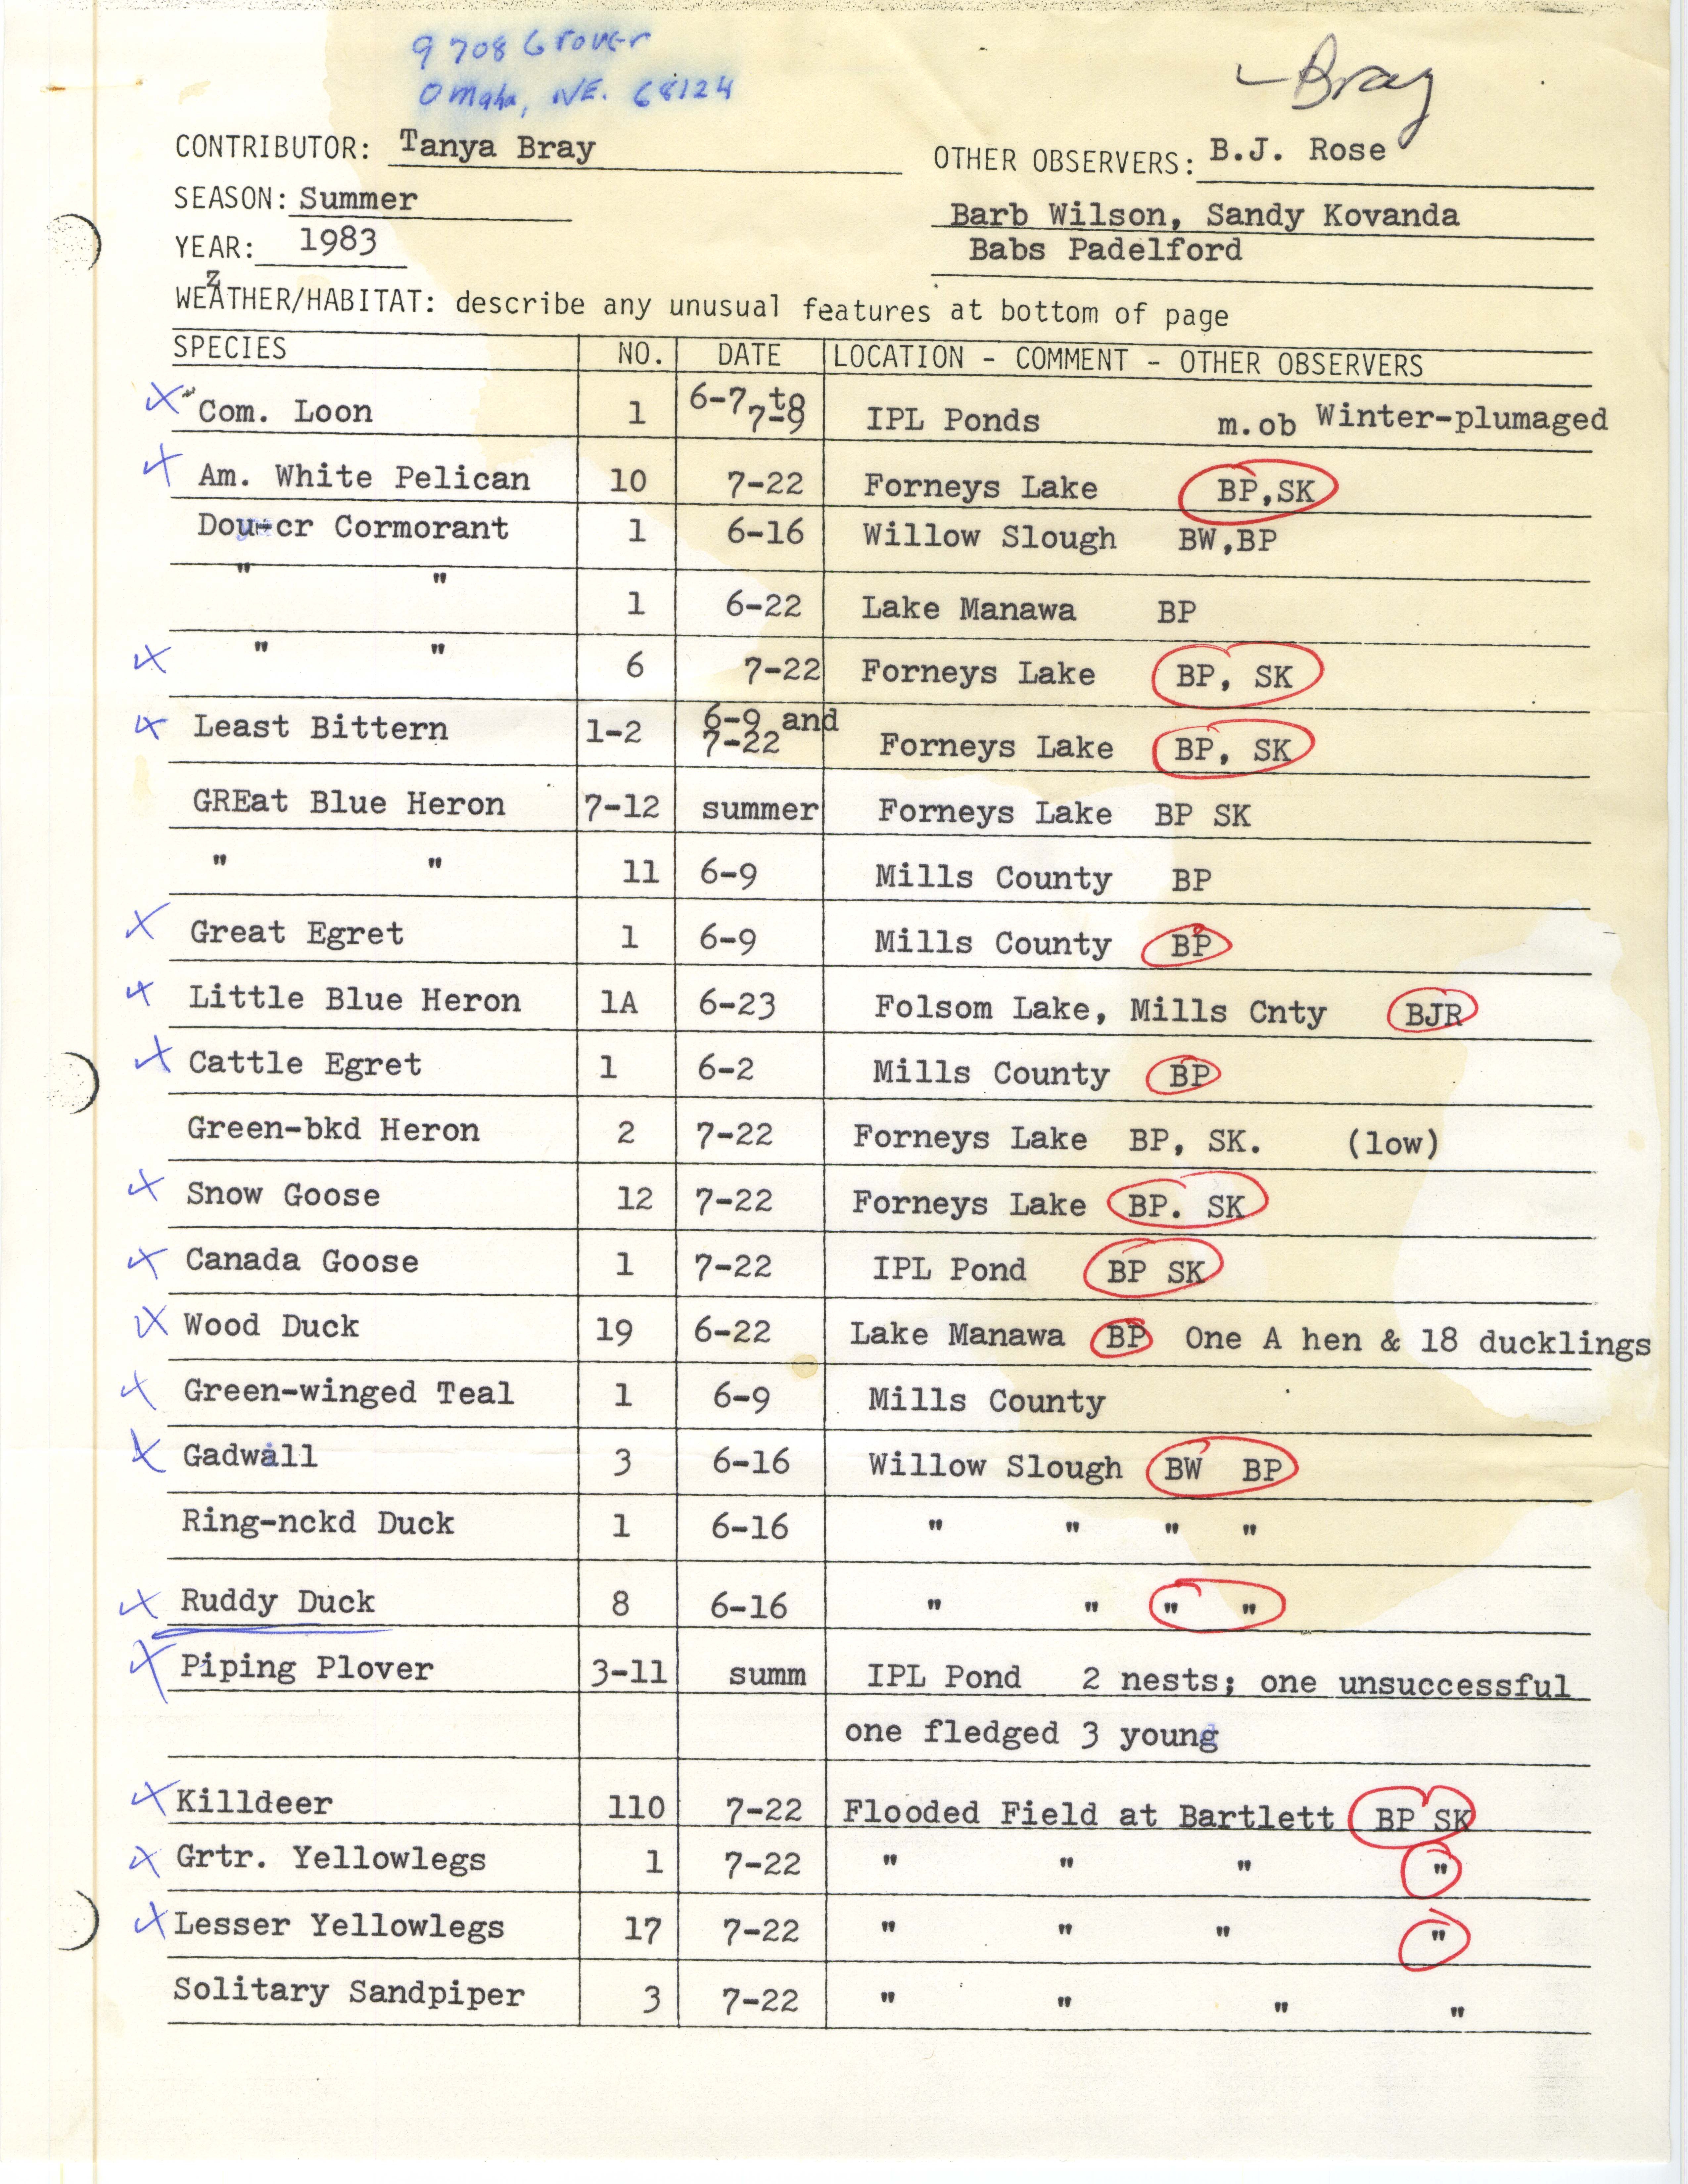 Annotated bird sighting list for Summer 1983 compiled by Tanya Bray